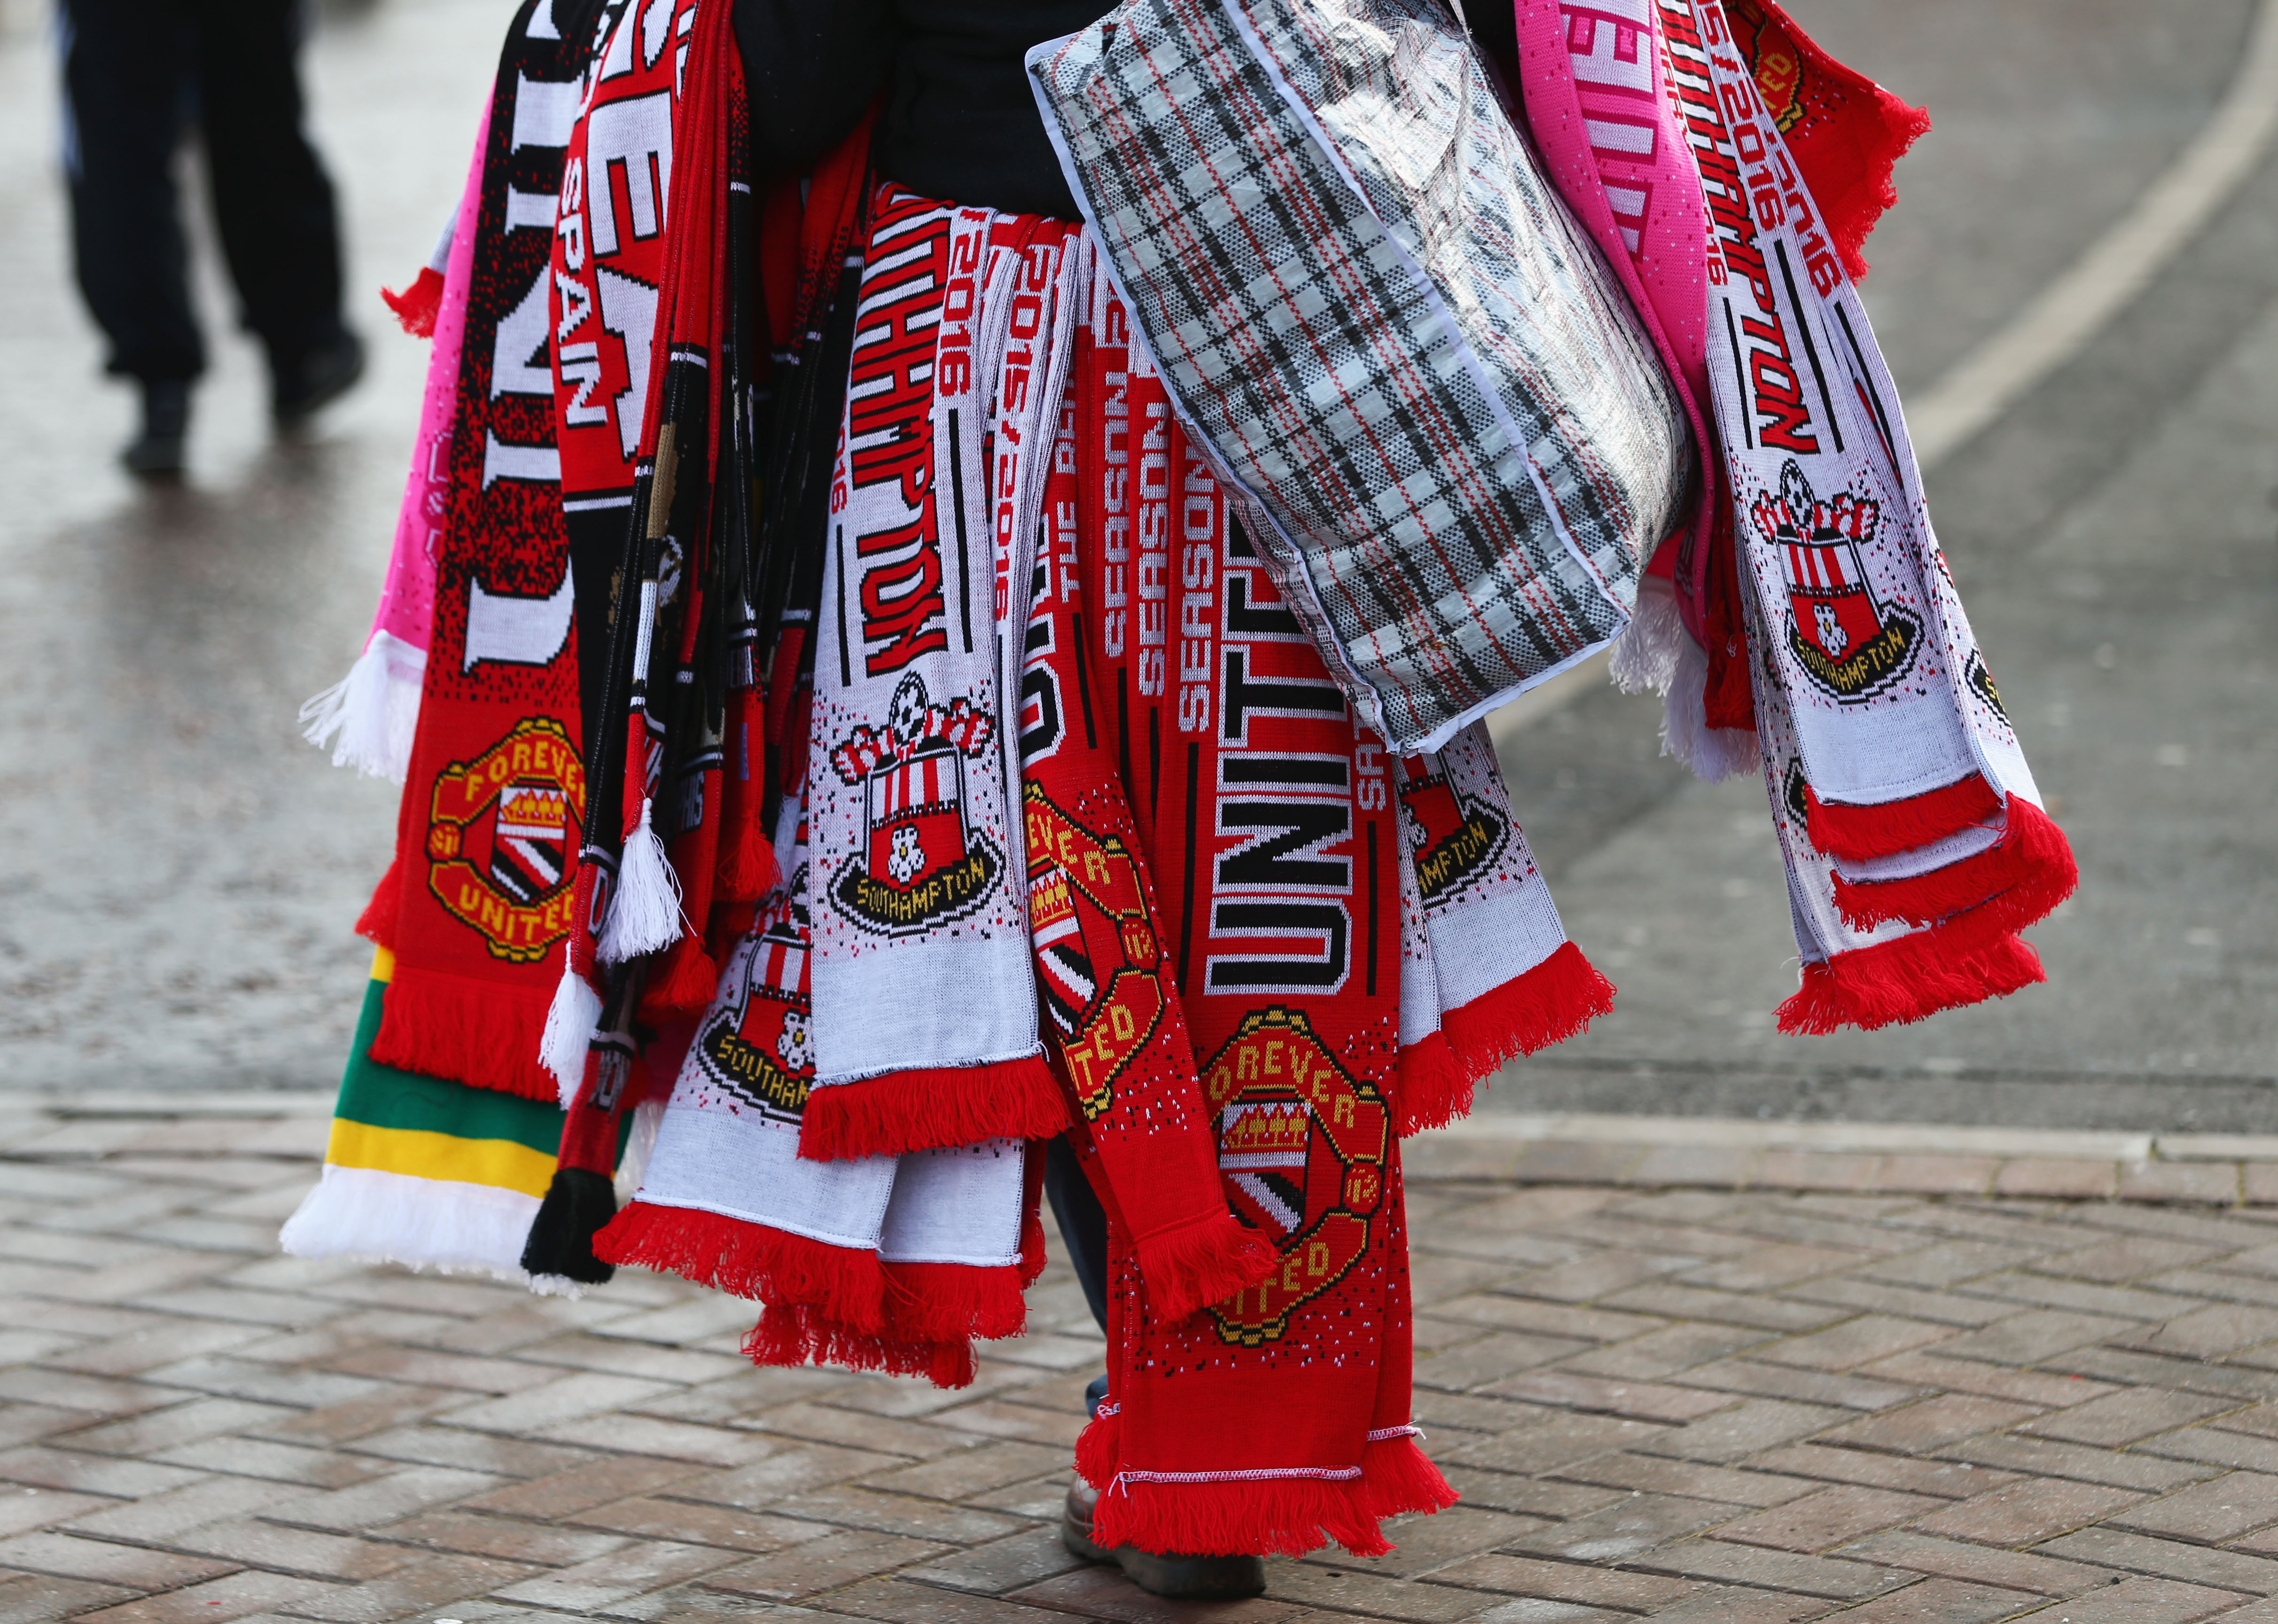 MANCHESTER, ENGLAND - JANUARY 23: Matchday scarves are on sale outside the stadium prior to the Barclays Premier League match between Manchester United and Southampton at Old Trafford on January 23, 2016 in Manchester, England.  (Photo by Michael Steele/Getty Images)